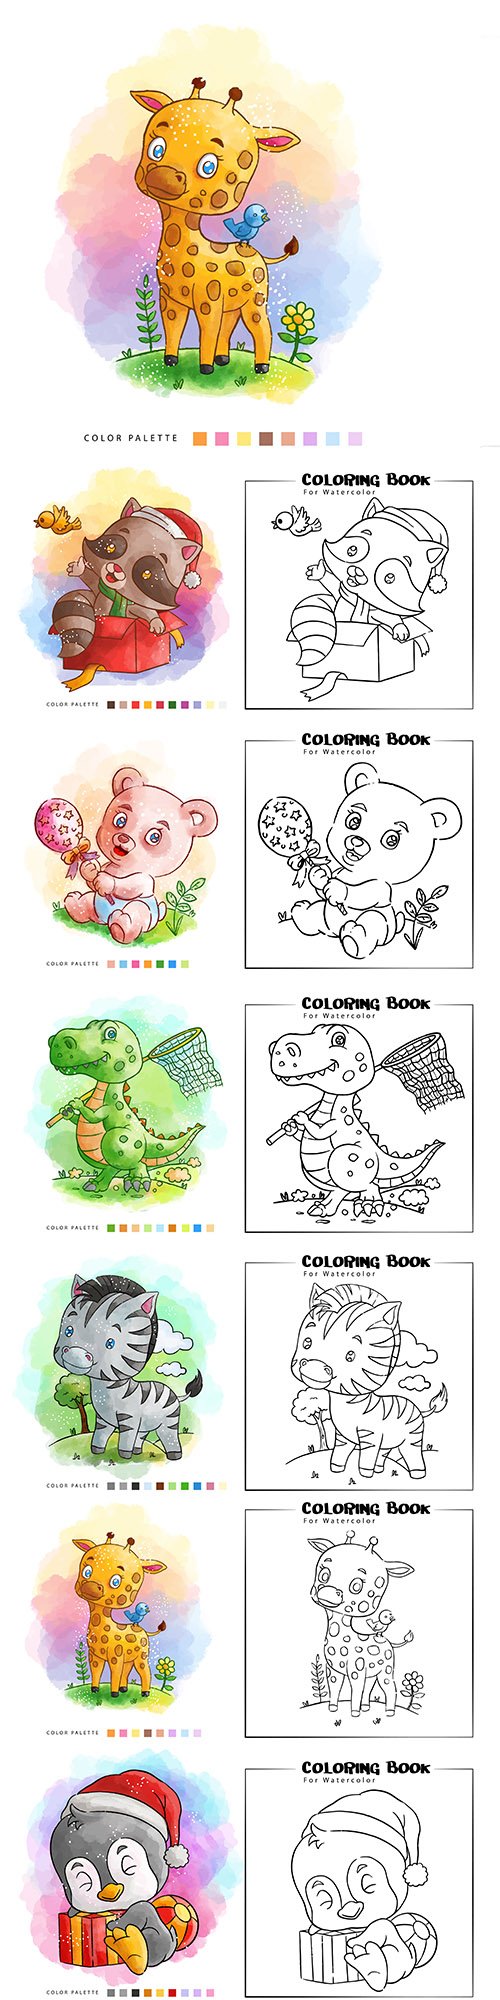 Coloring nice animal watercolor illustrations